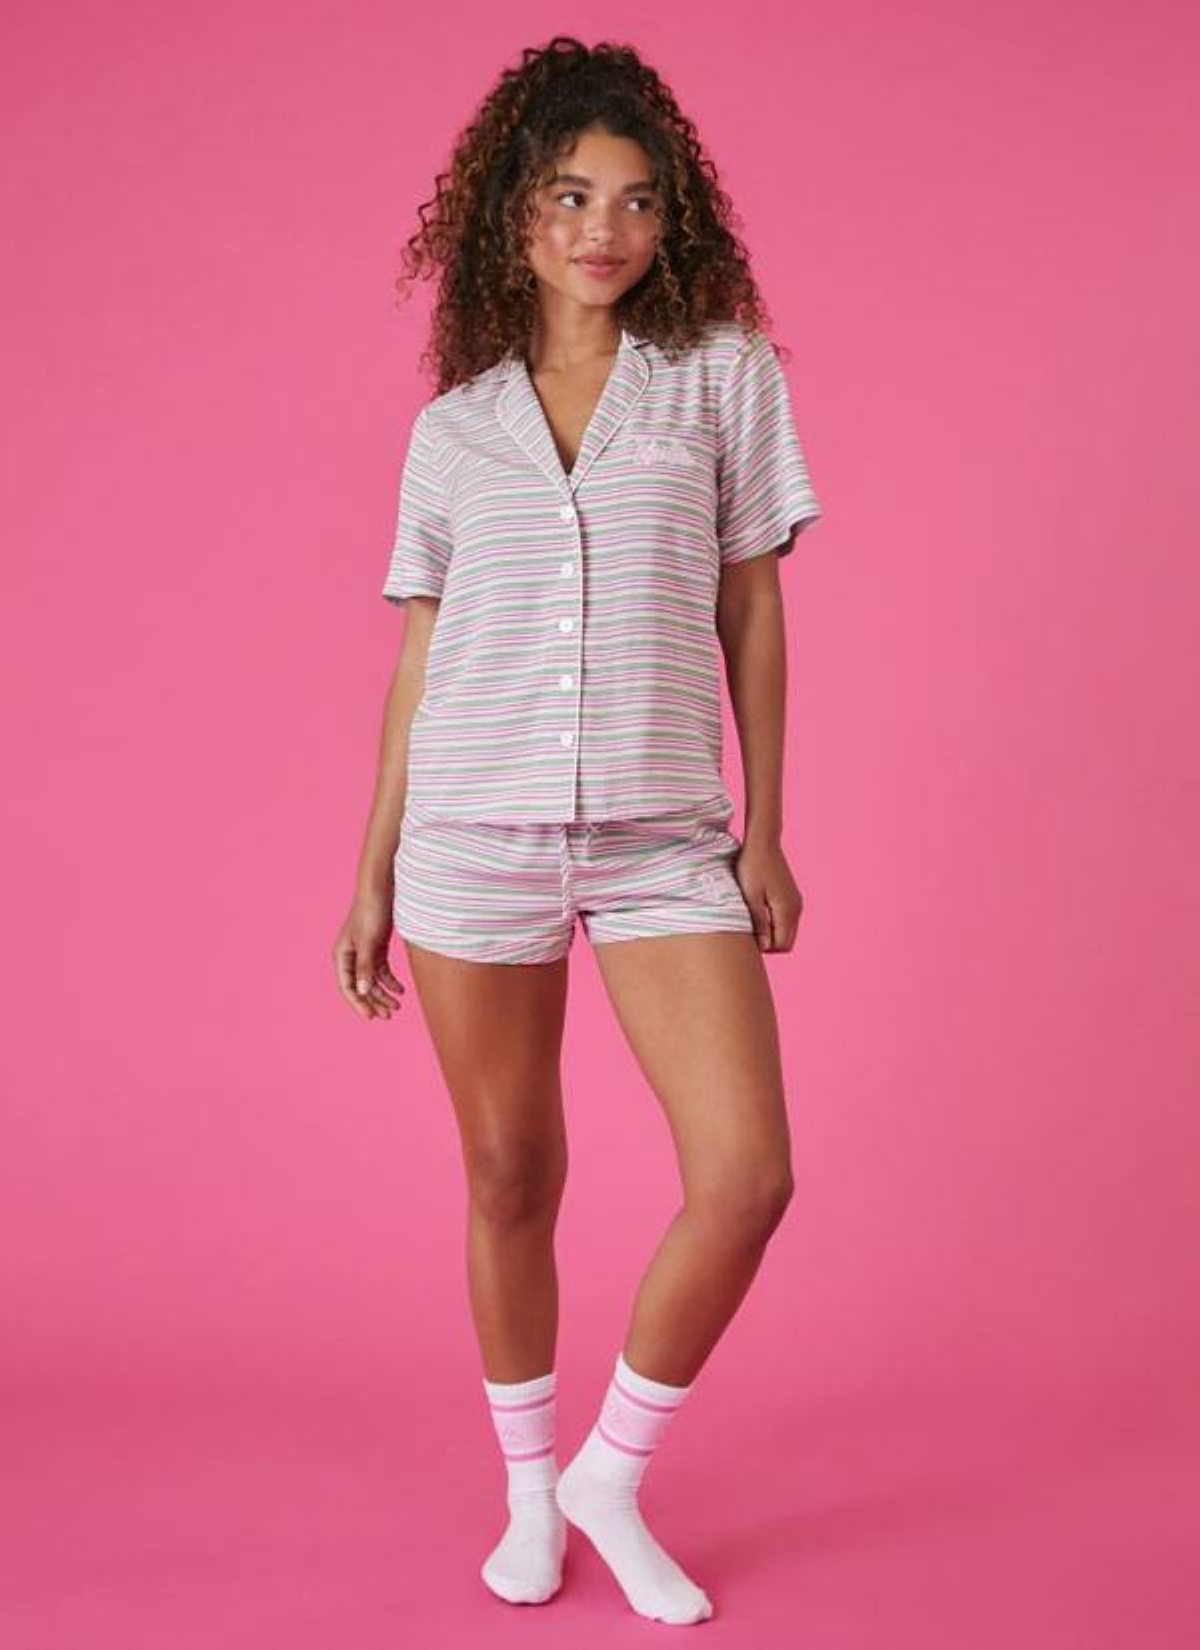 Bring the pajama party to life with an expanded range of sleepwear.